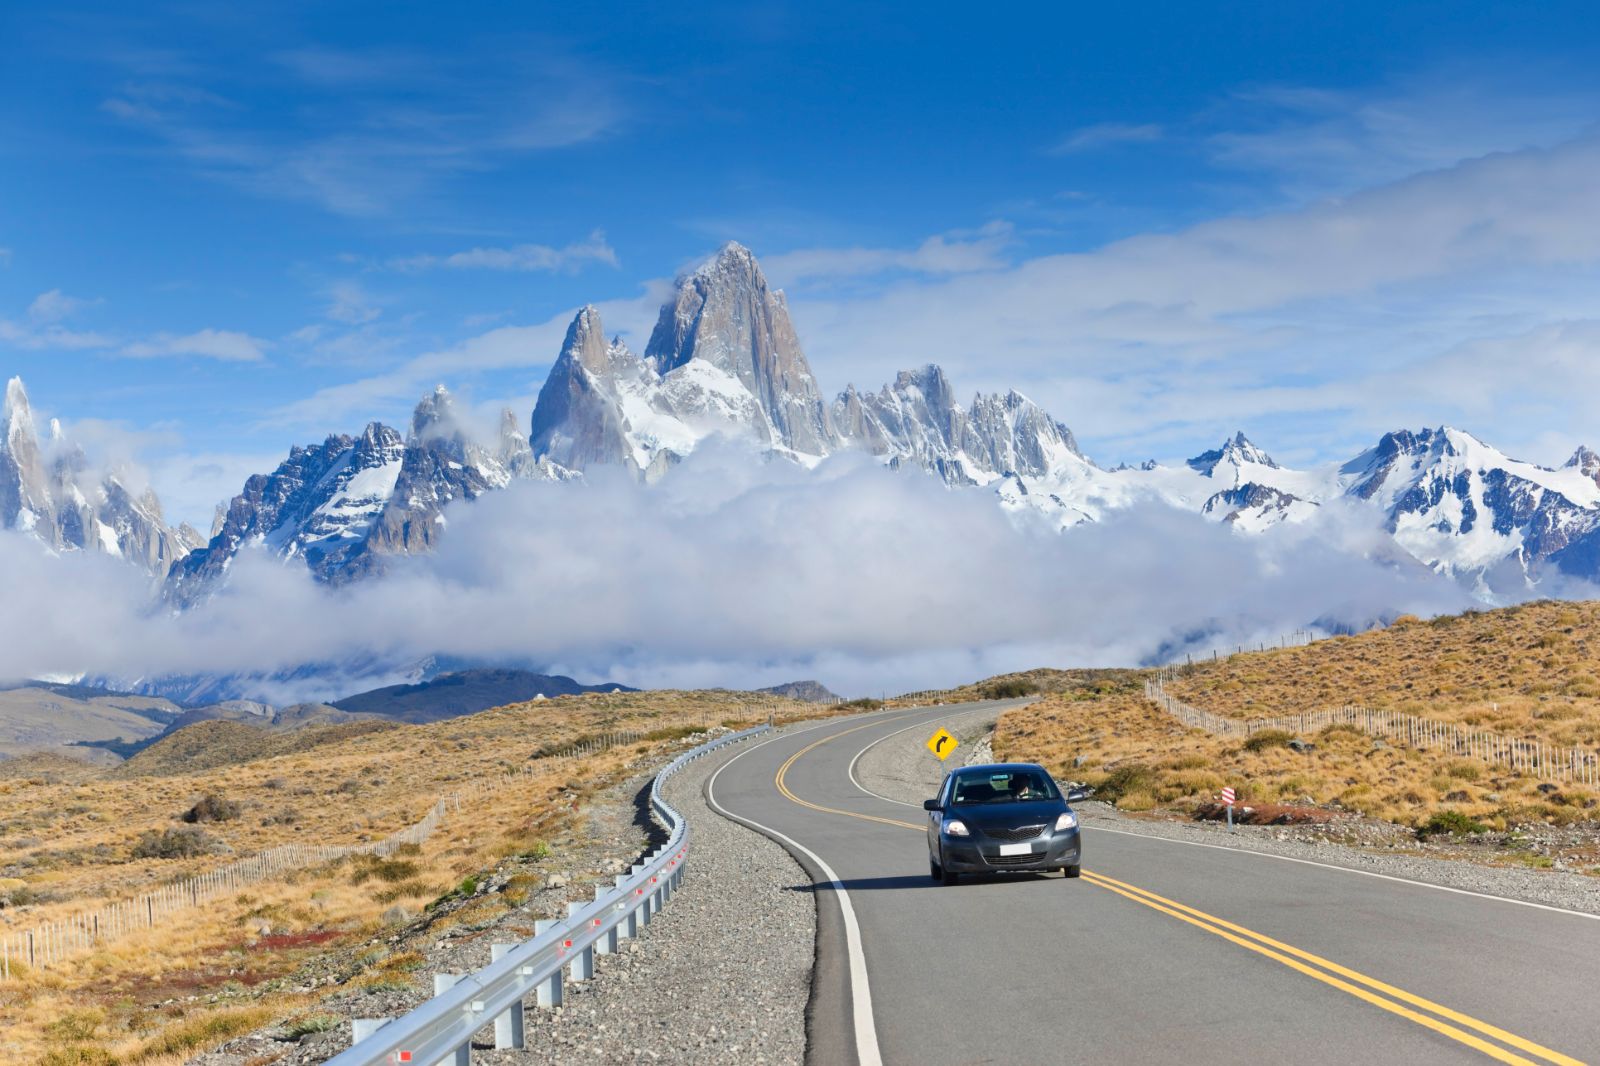 Car driving in El Chalten Argentina with the peaks of Fitz Roy in the background